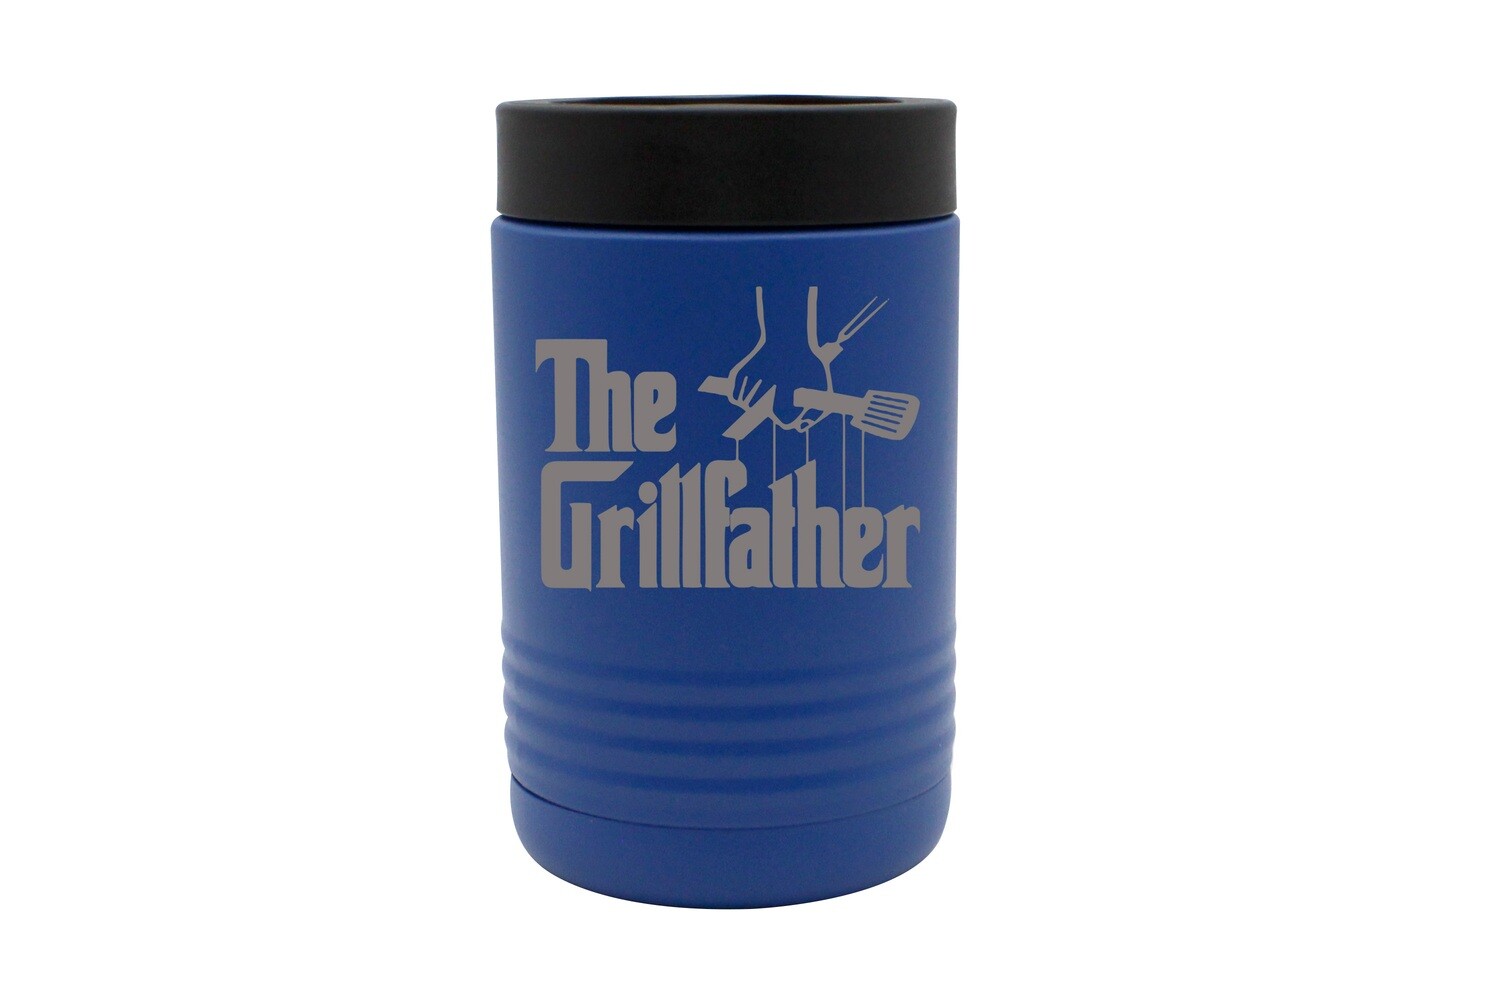 The Grillfather with or without Location Insulated Beverage Holder